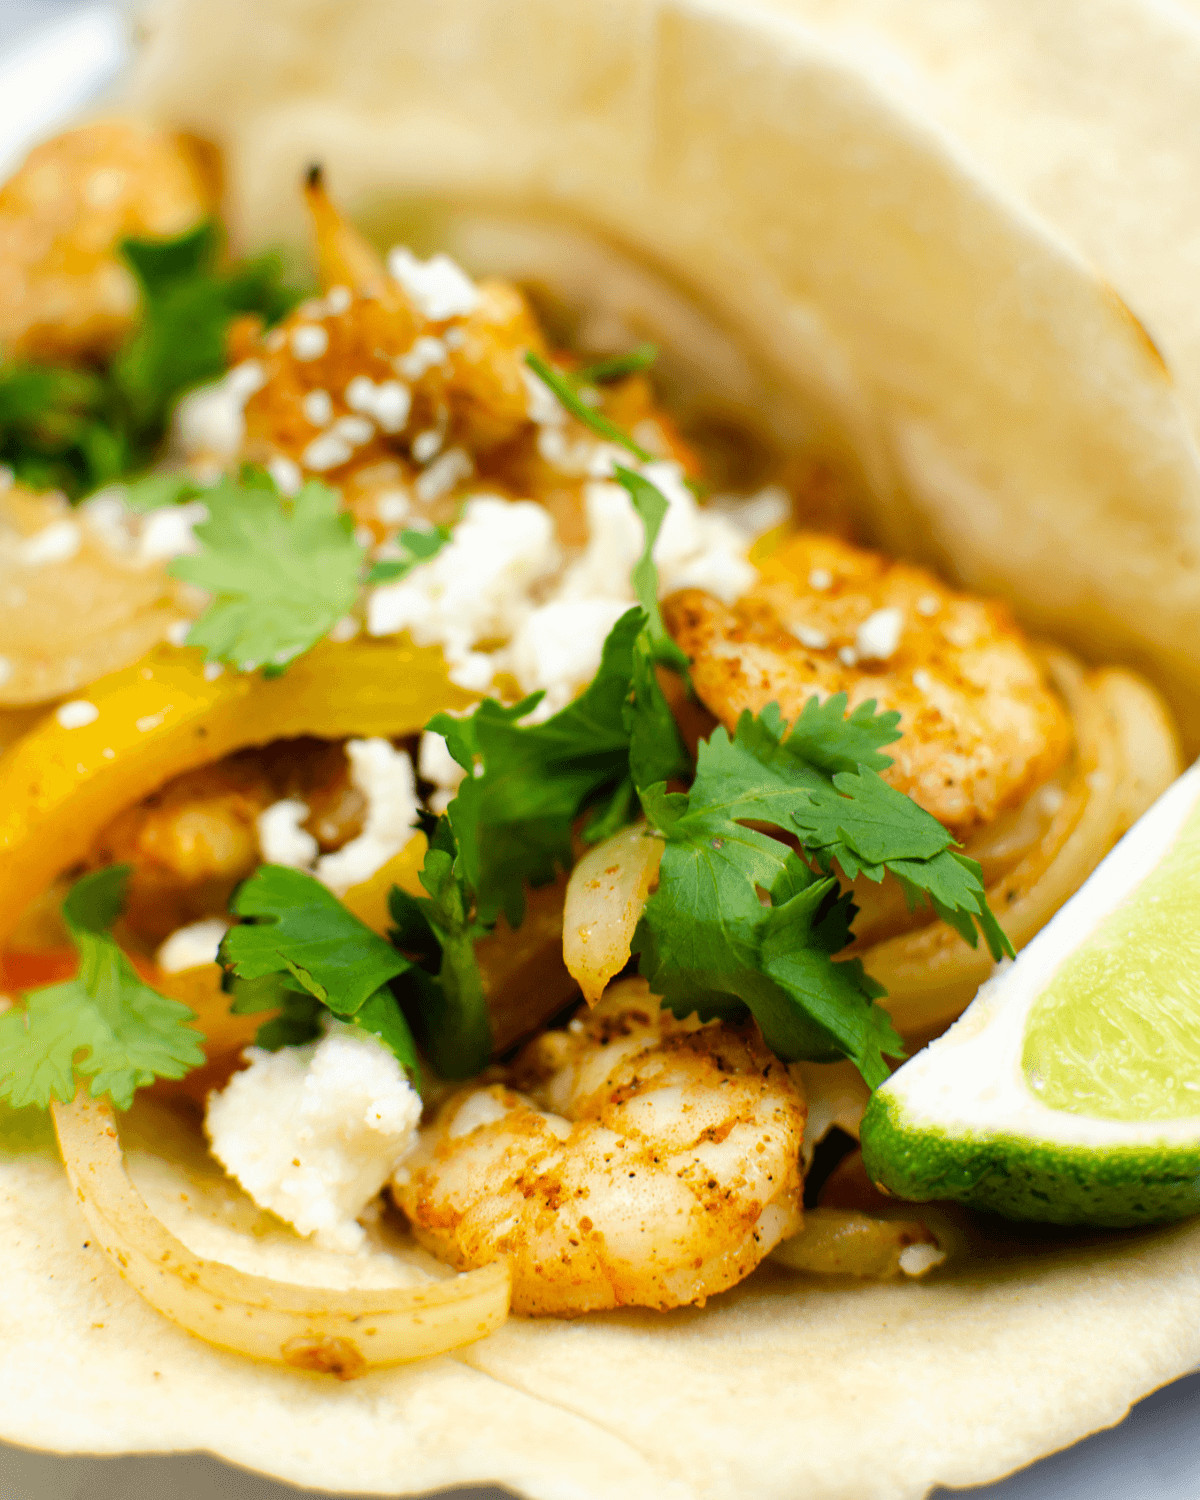 A shrimp fajita taco garnished with cilantro, crumbled cheese, sautéed onions and yellow peppers, served with a lime wedge on a white plate.